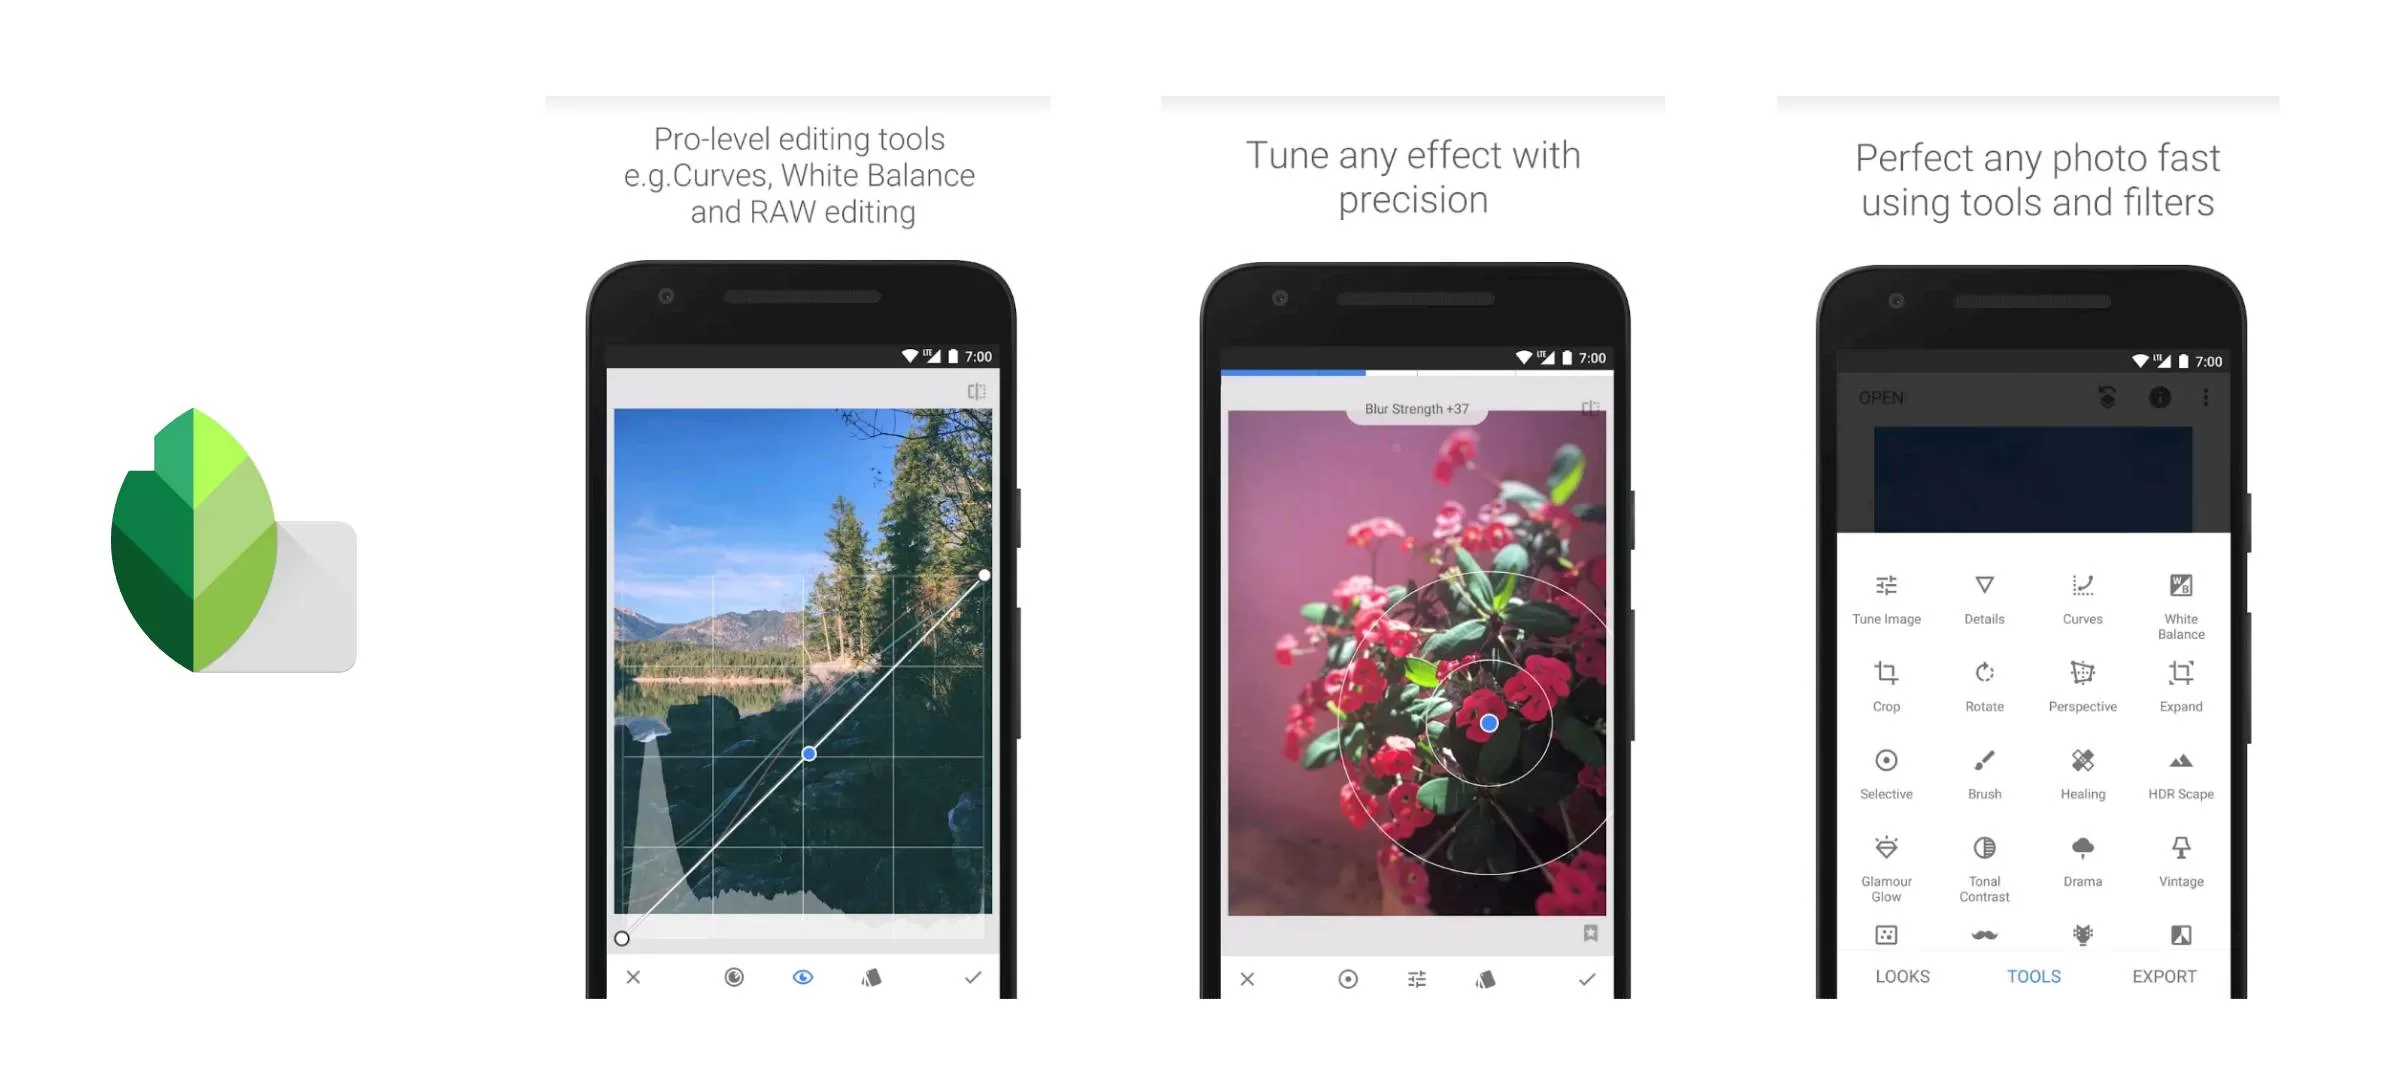 Snapseed Photo Editor for Android